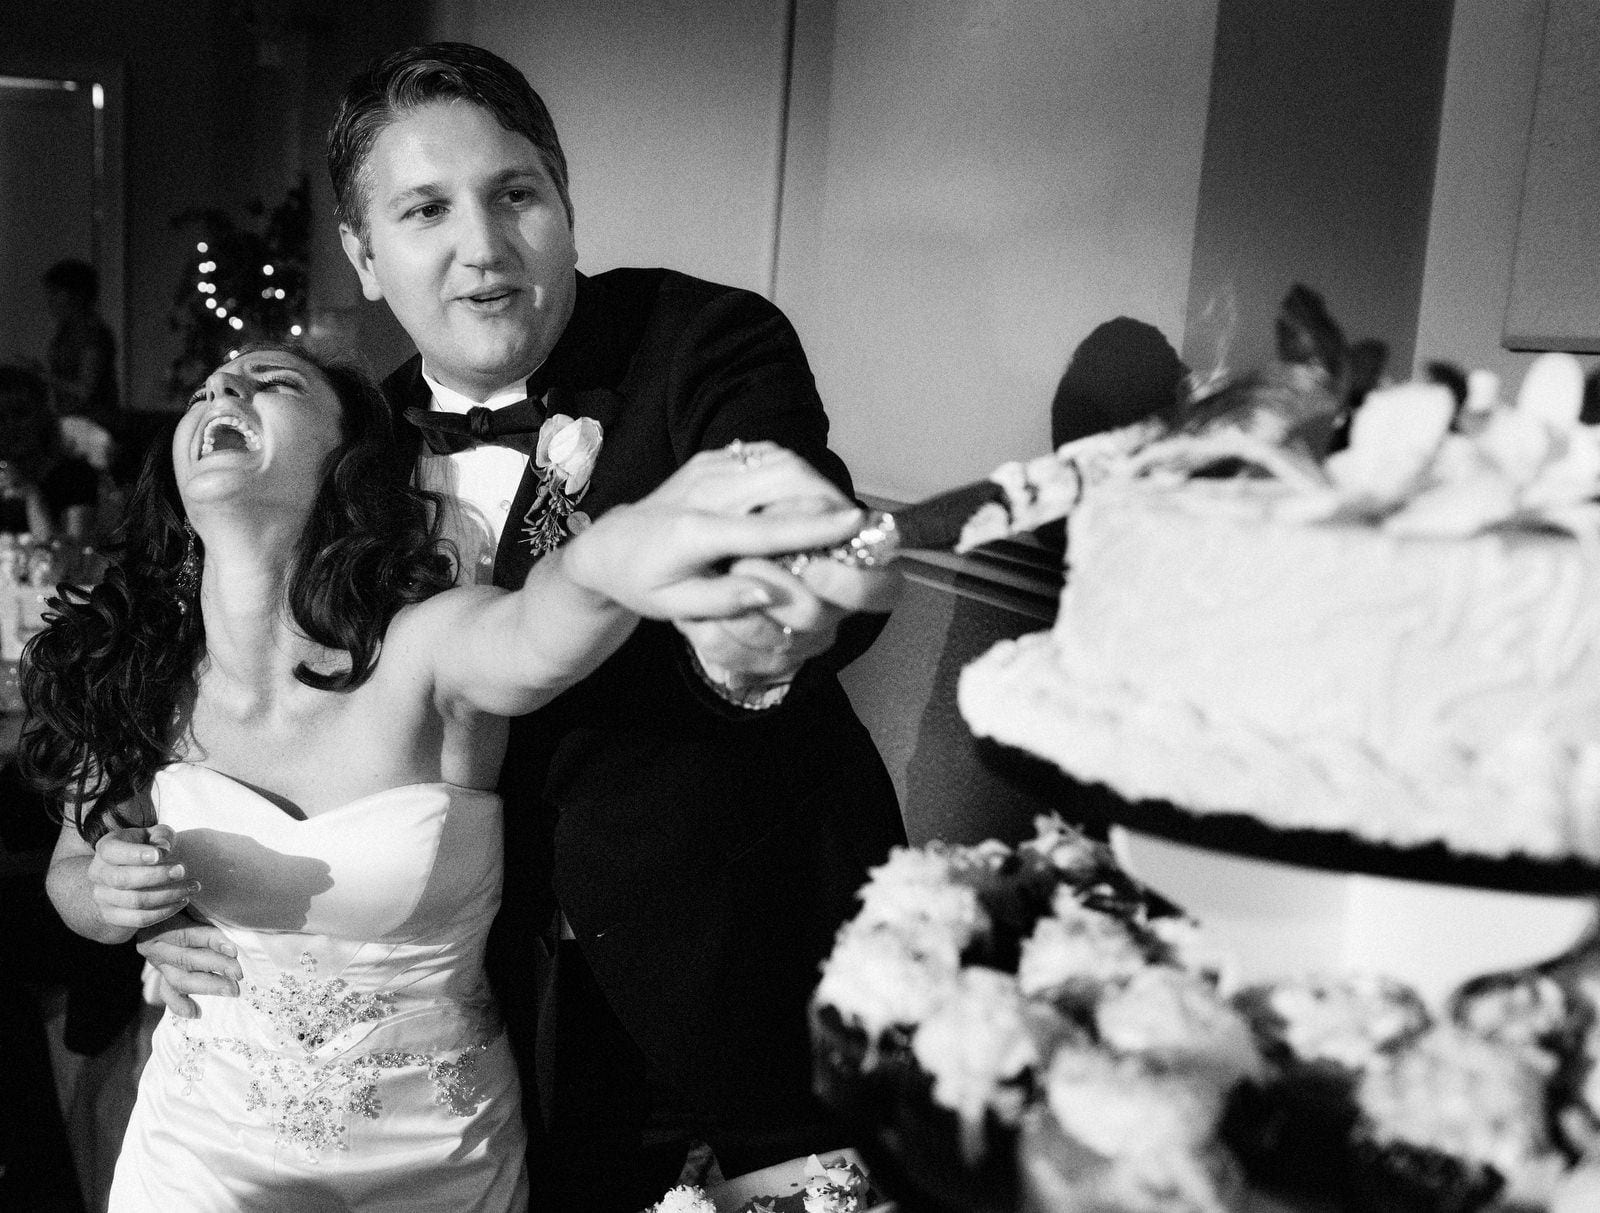 A bride laughs as she and her husband reach out to cut their cake during their wedding at Pittsburgh's Grand Hall.